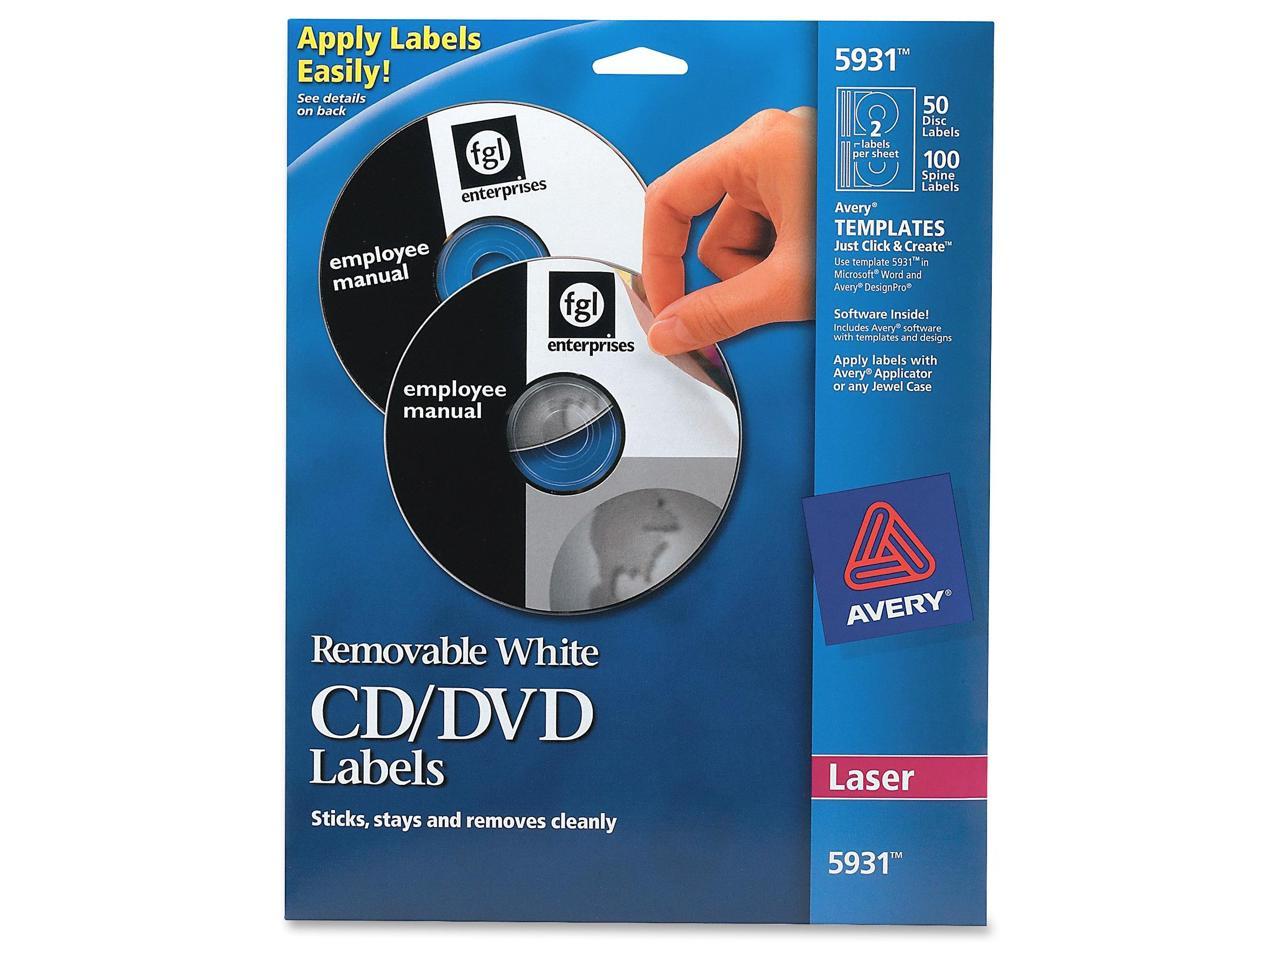 avery-5931-matte-white-removable-cd-labels-for-laser-printers